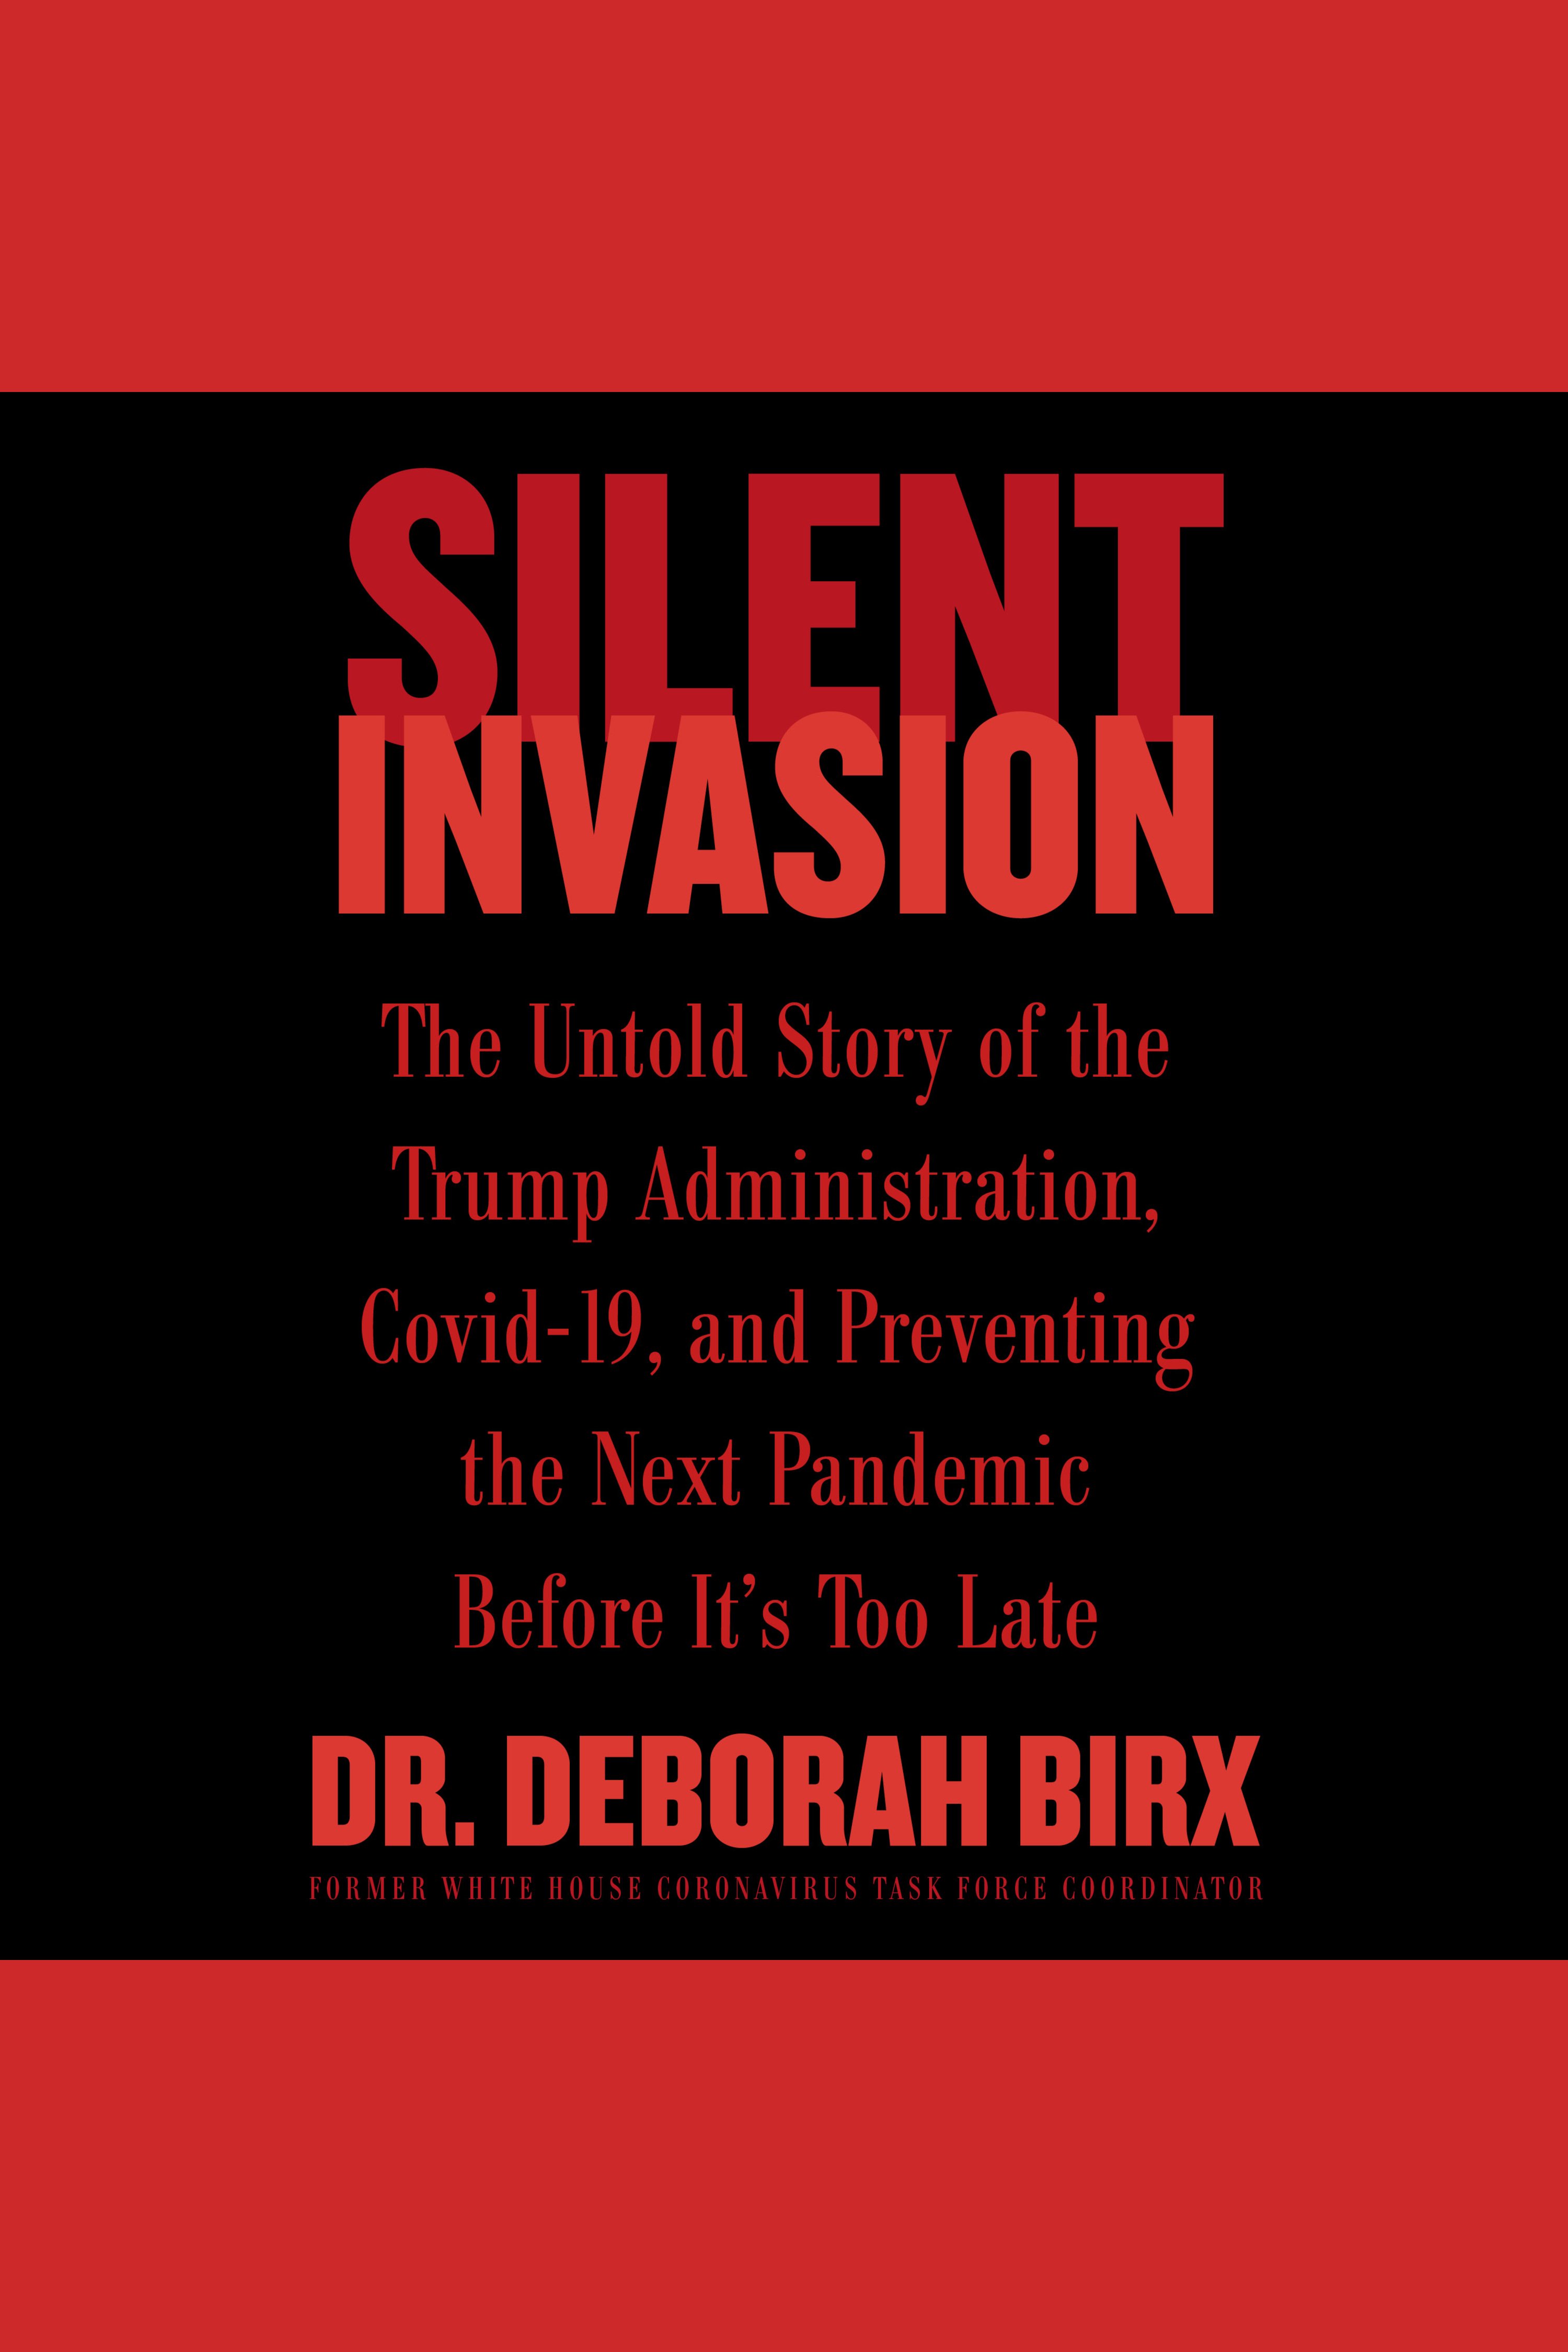 Silent Invasion The Untold Story of the Trump Administration, Covid-19, and Preventing the Next Pandemic Before It's Too Late cover image